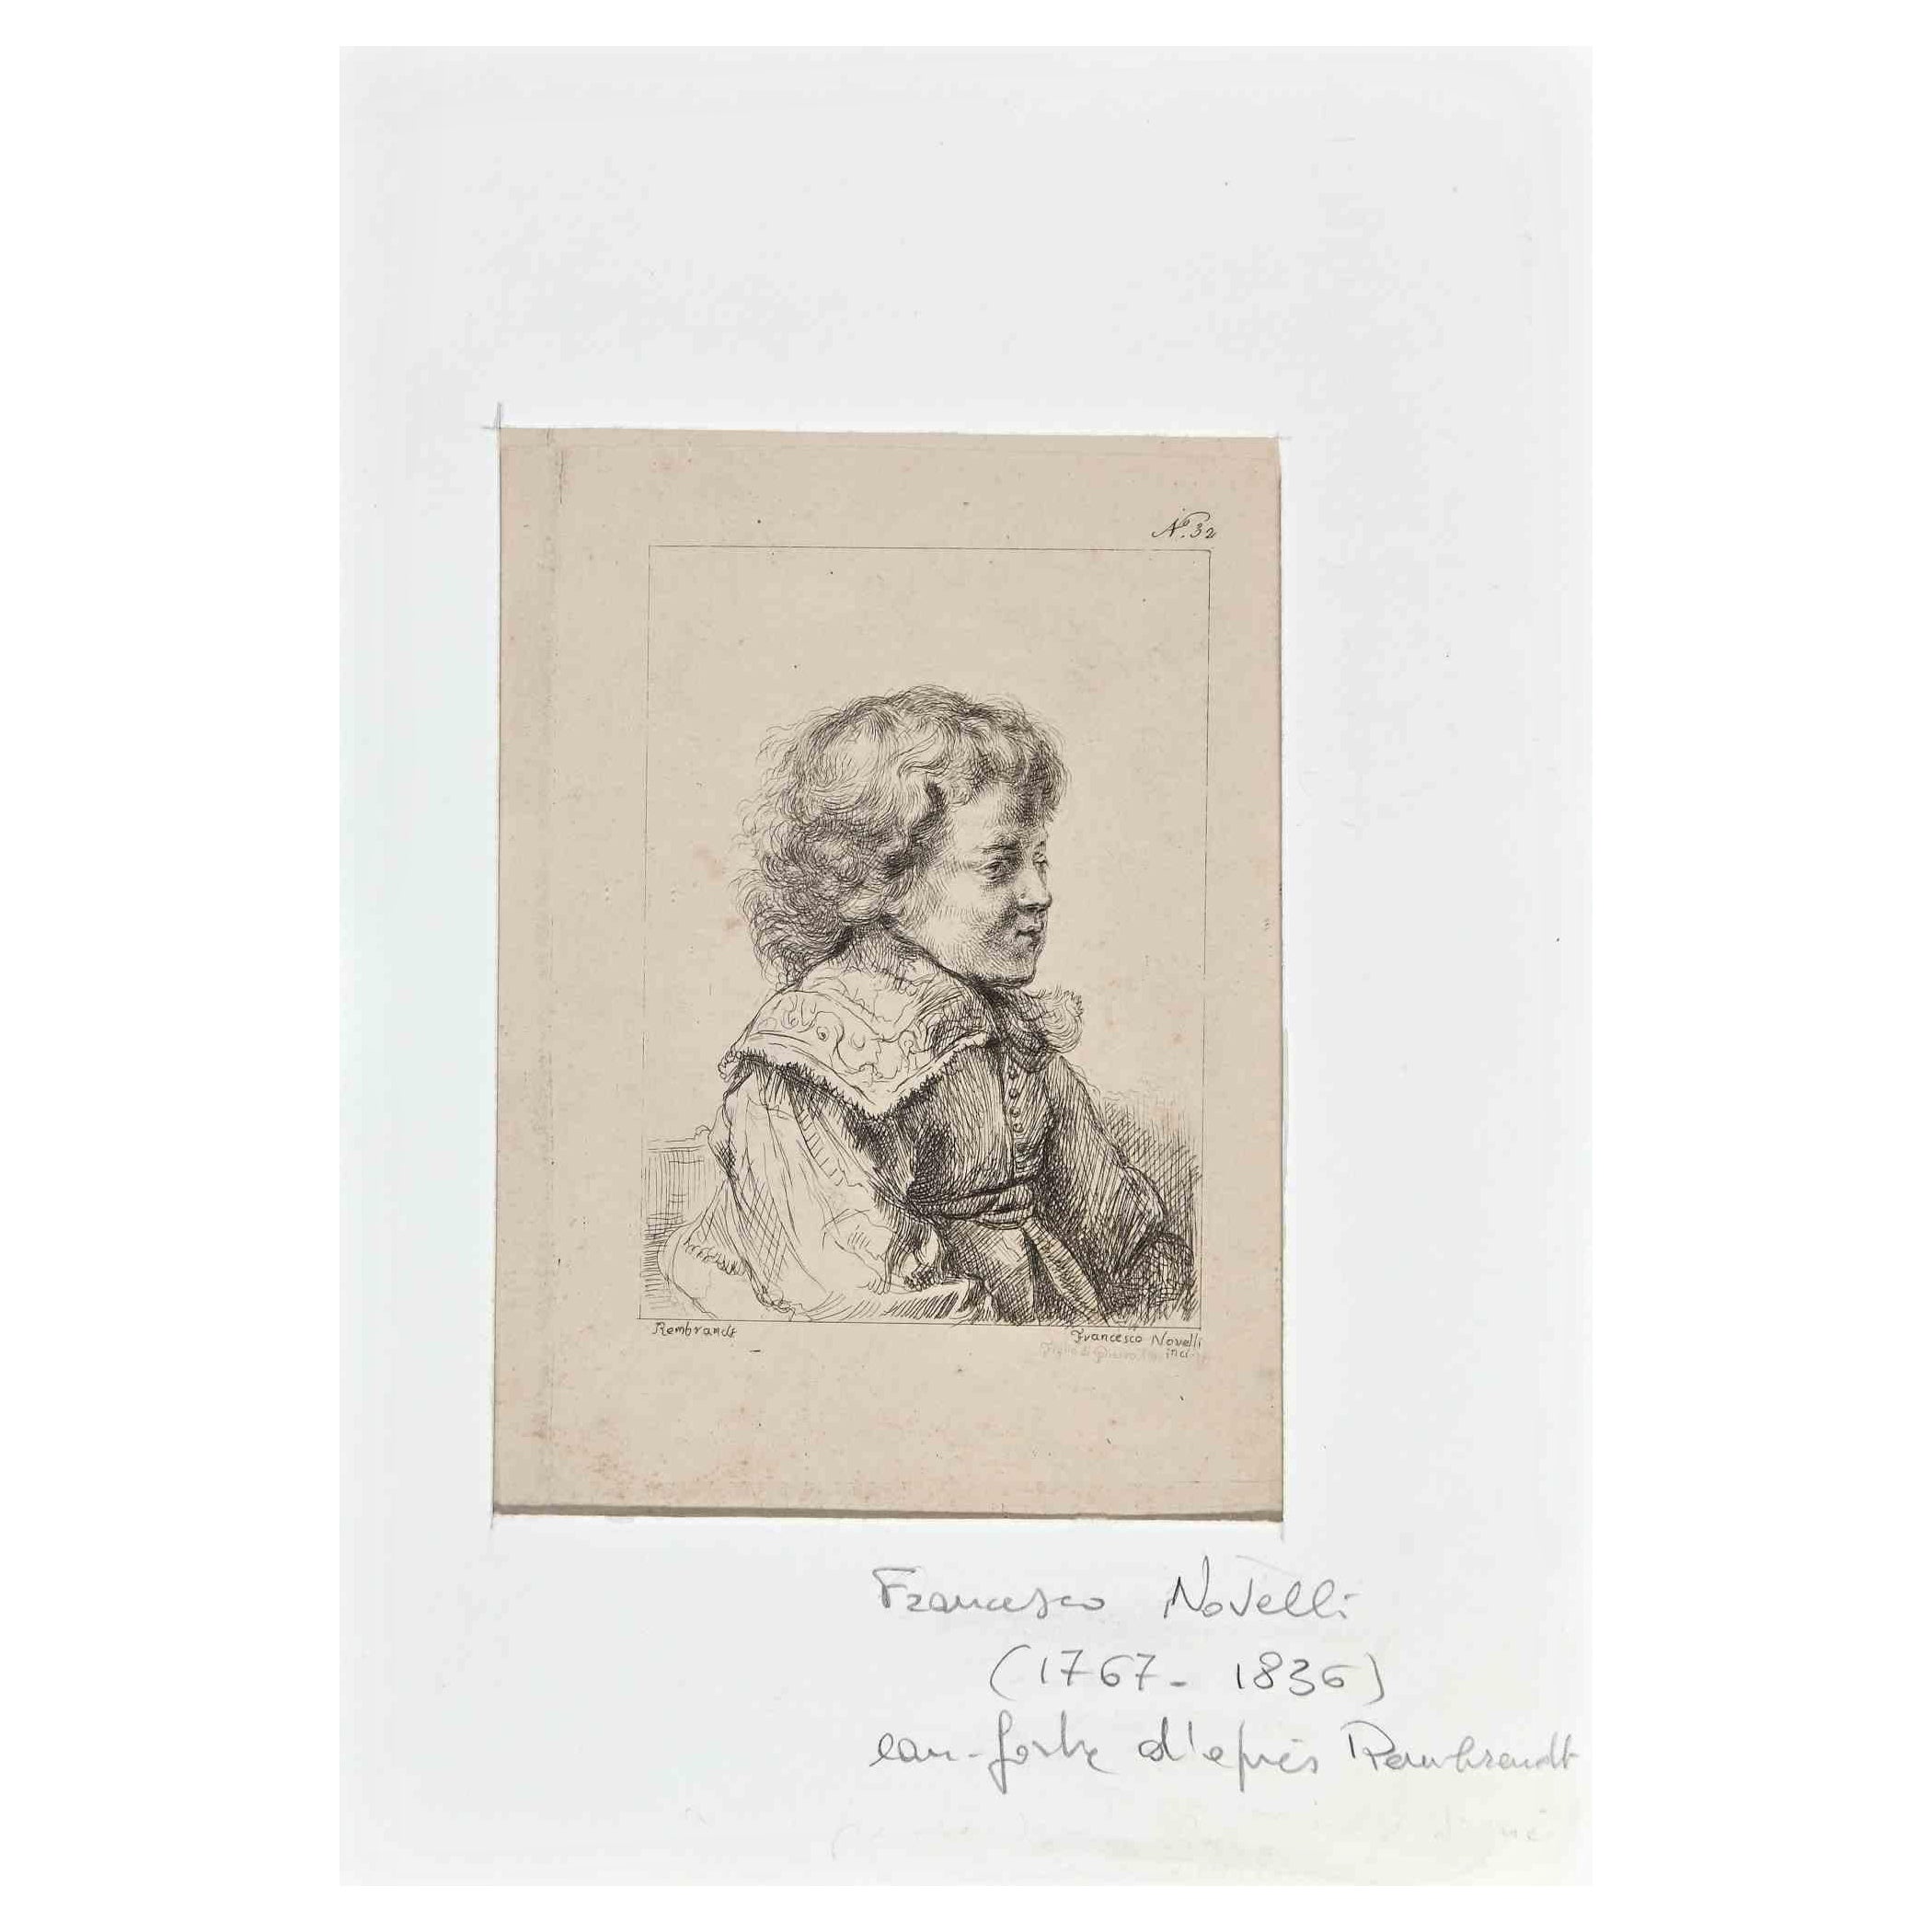 Portrait is an original Etching realized in the Early 19th Century after Rembrandt by Francesco Novelli (1767-1836).

Signed on the plate, On the left plate signed" Rembrandt"

Included a White Passepartout: 22x 15 cm

In good condition. 

The